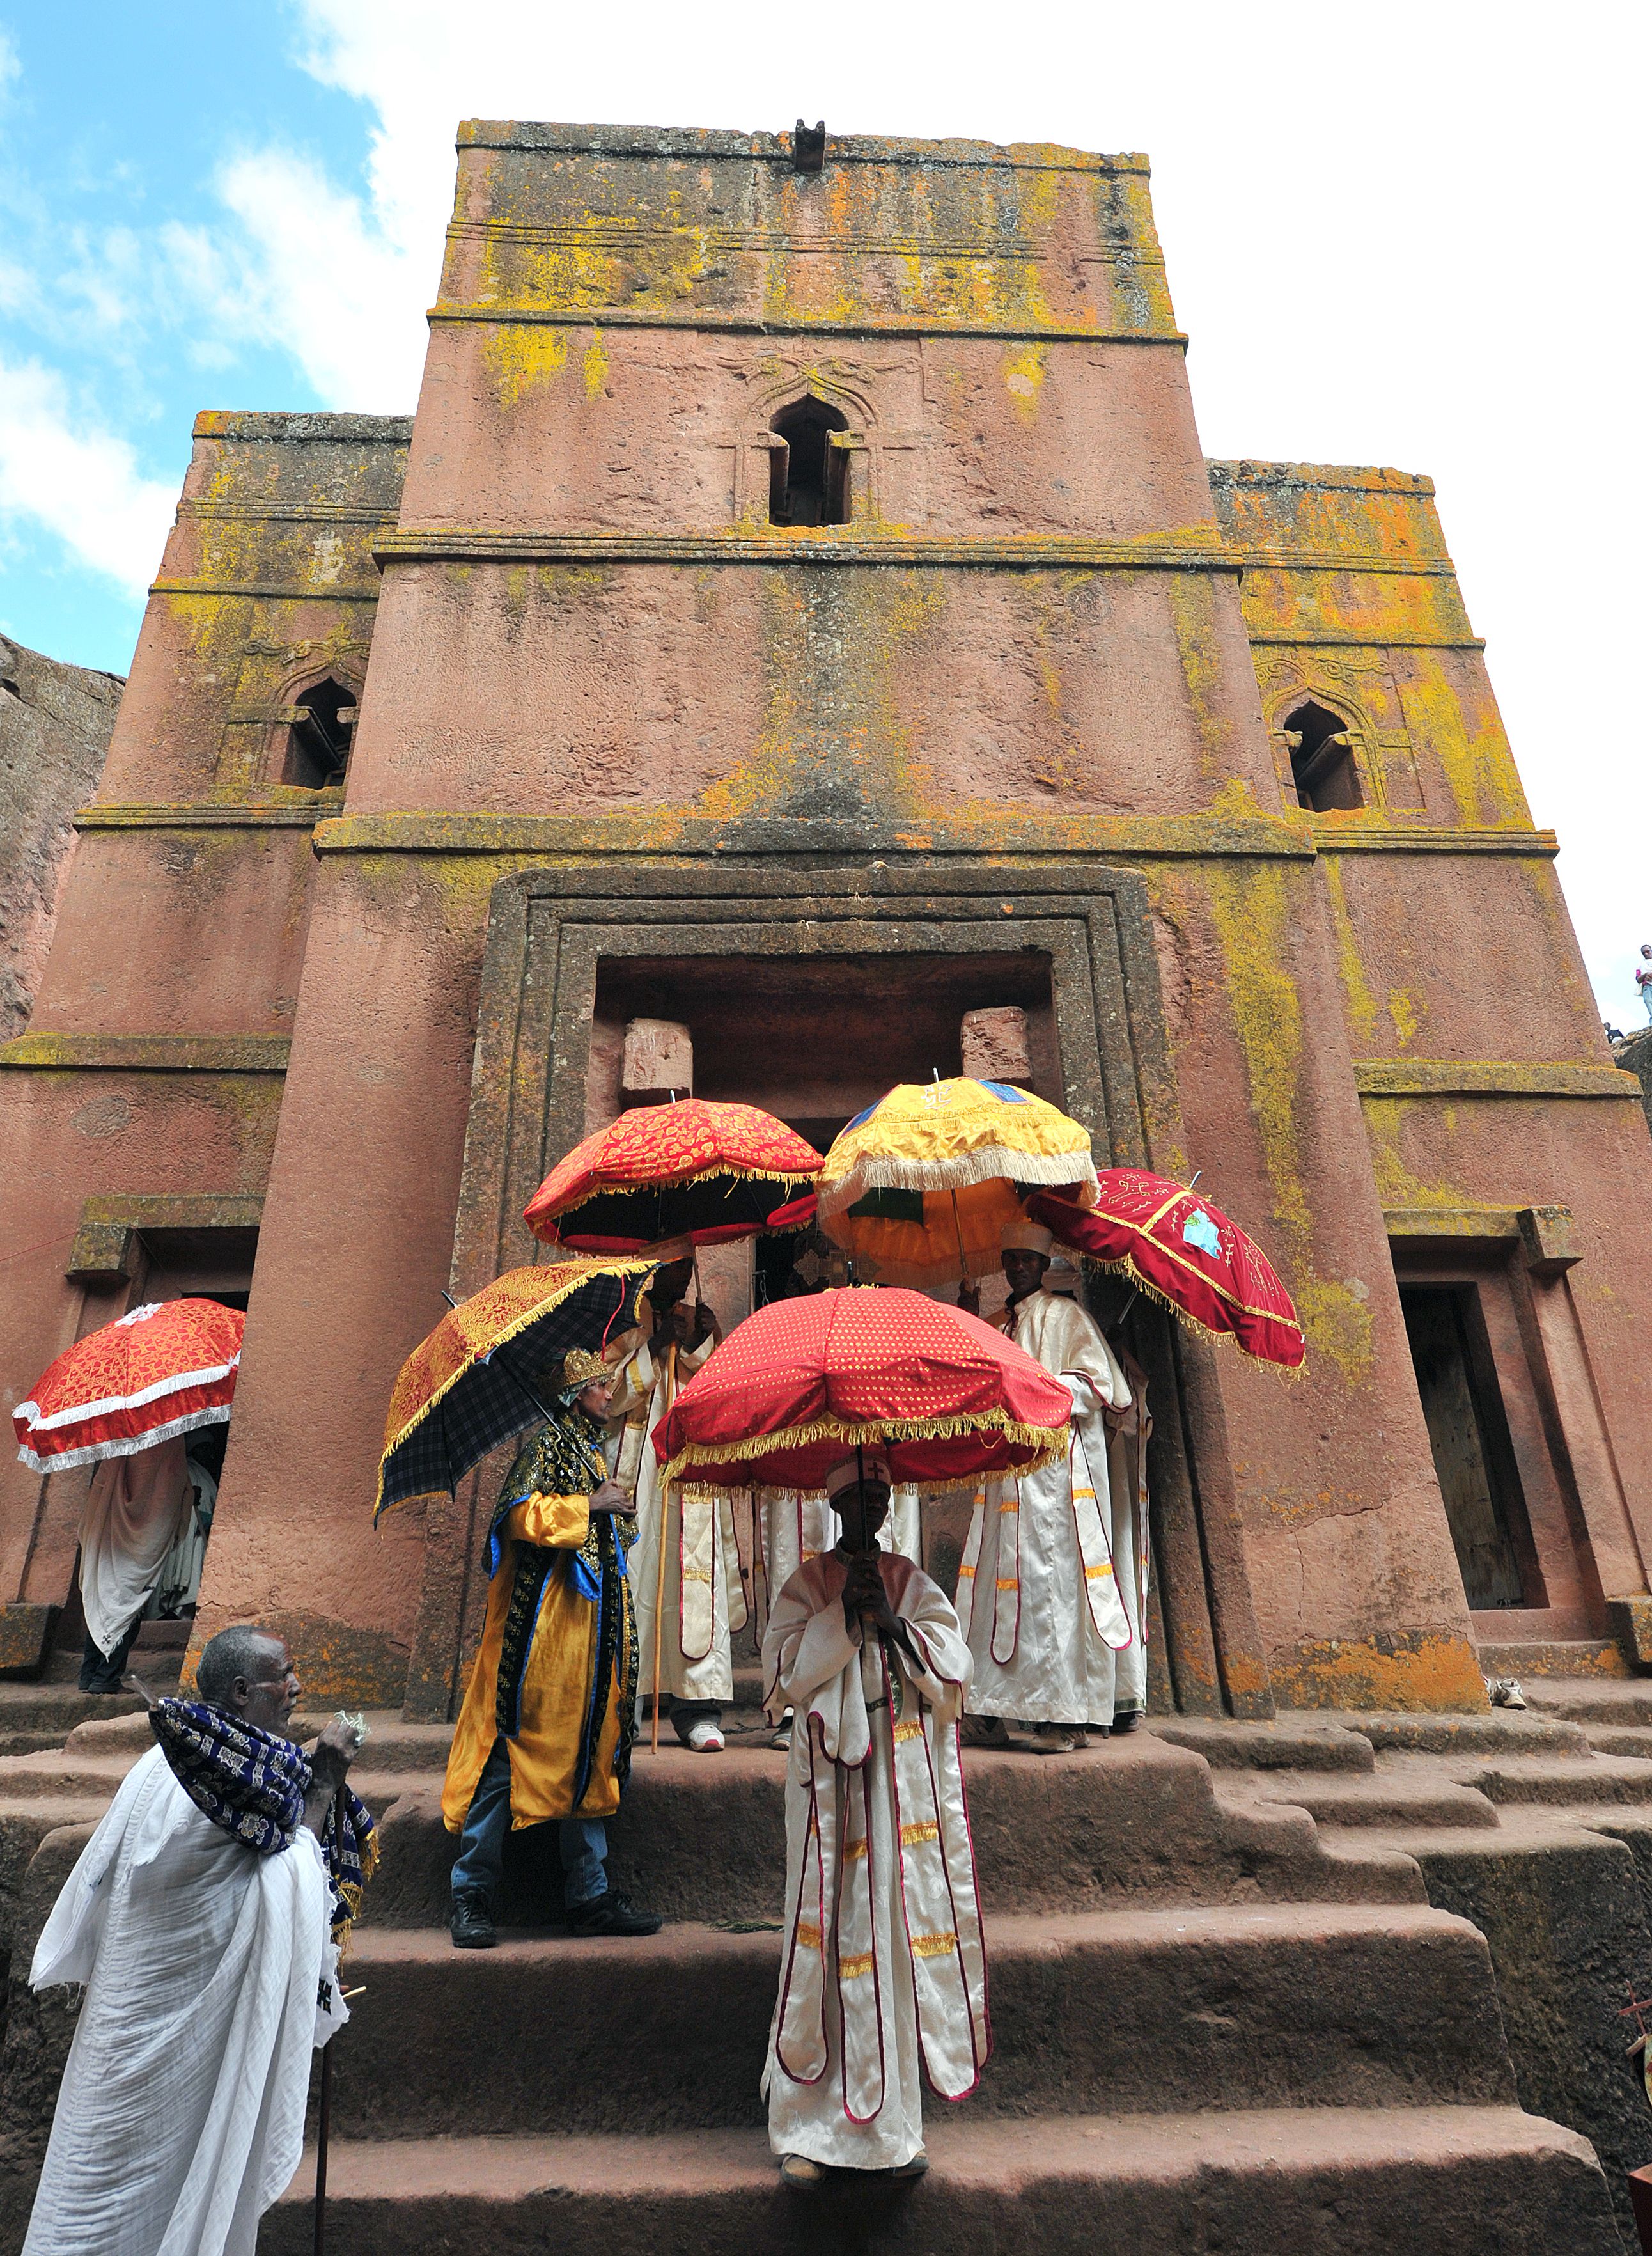 Priest in Bet Danaghel Church holding the Cross of King Lalibela. The  rock-hewn churches of Lalibela make it one of the greatest  Religio-Historical sites not only in Africa but in the Christian